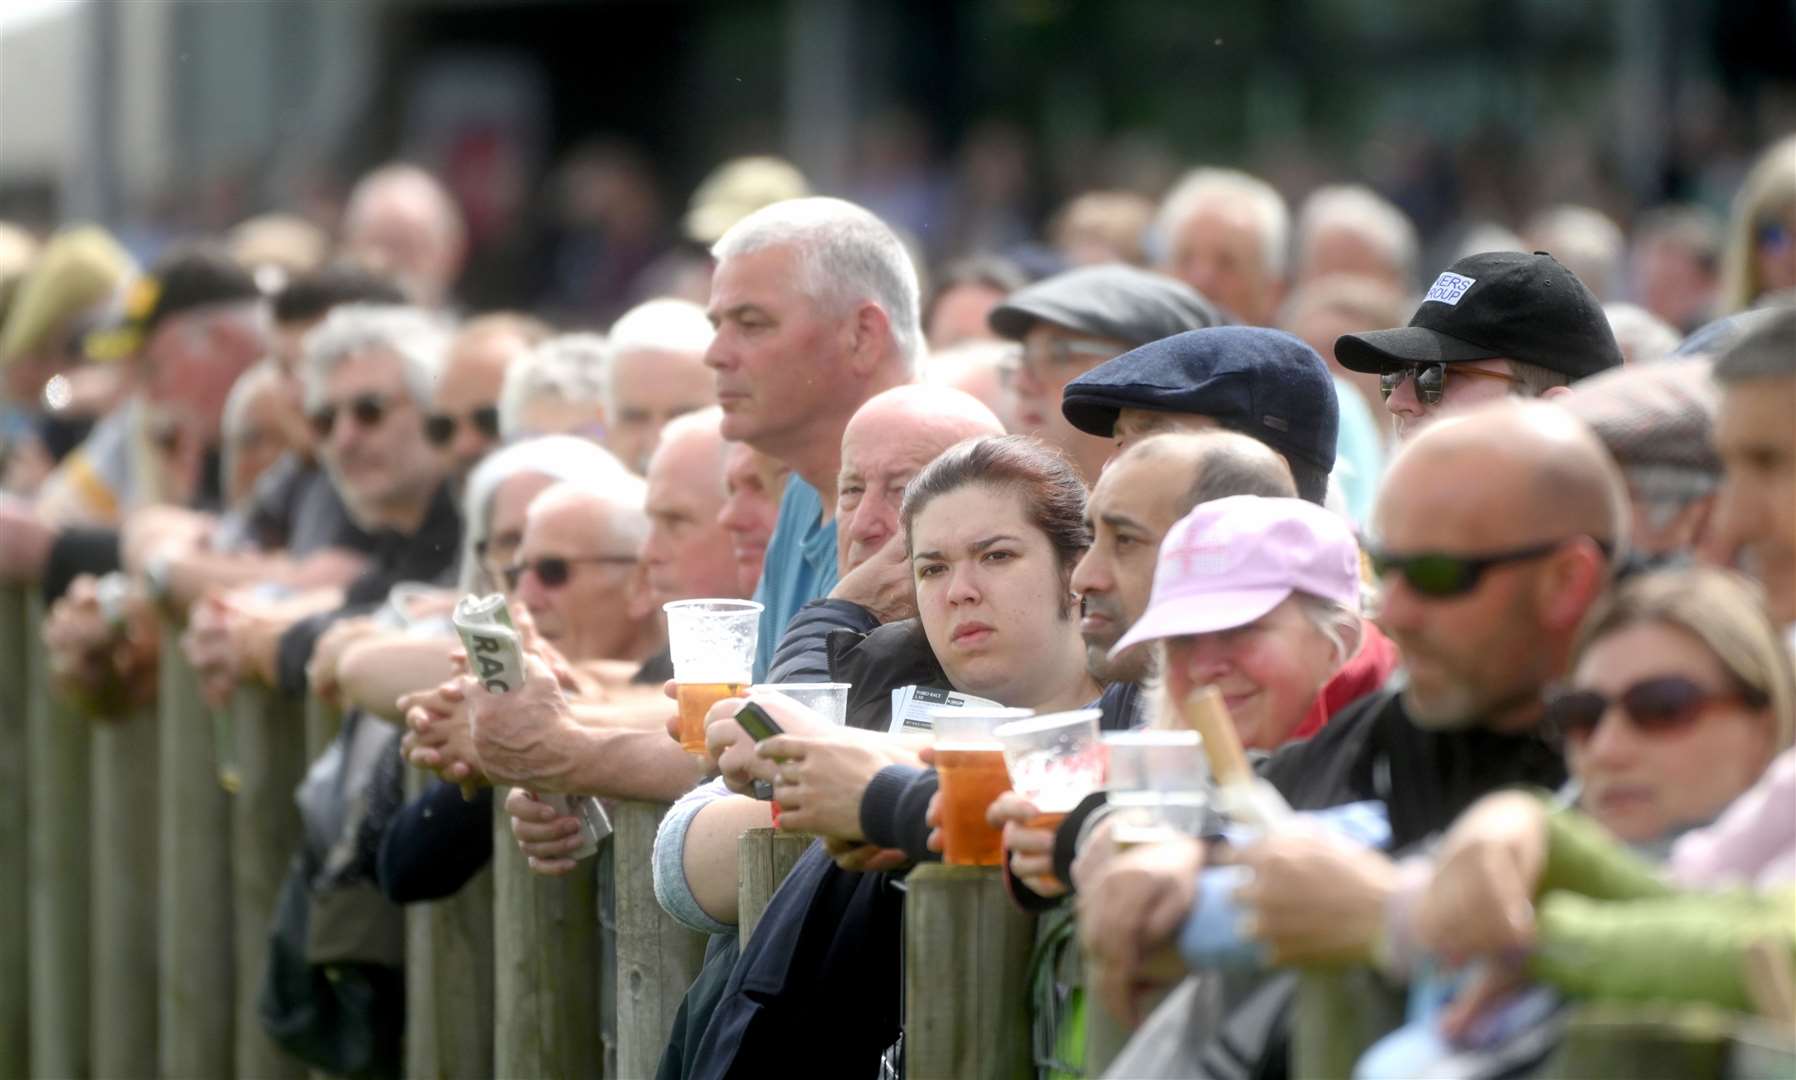 Crowds at a previous Fakenham race day